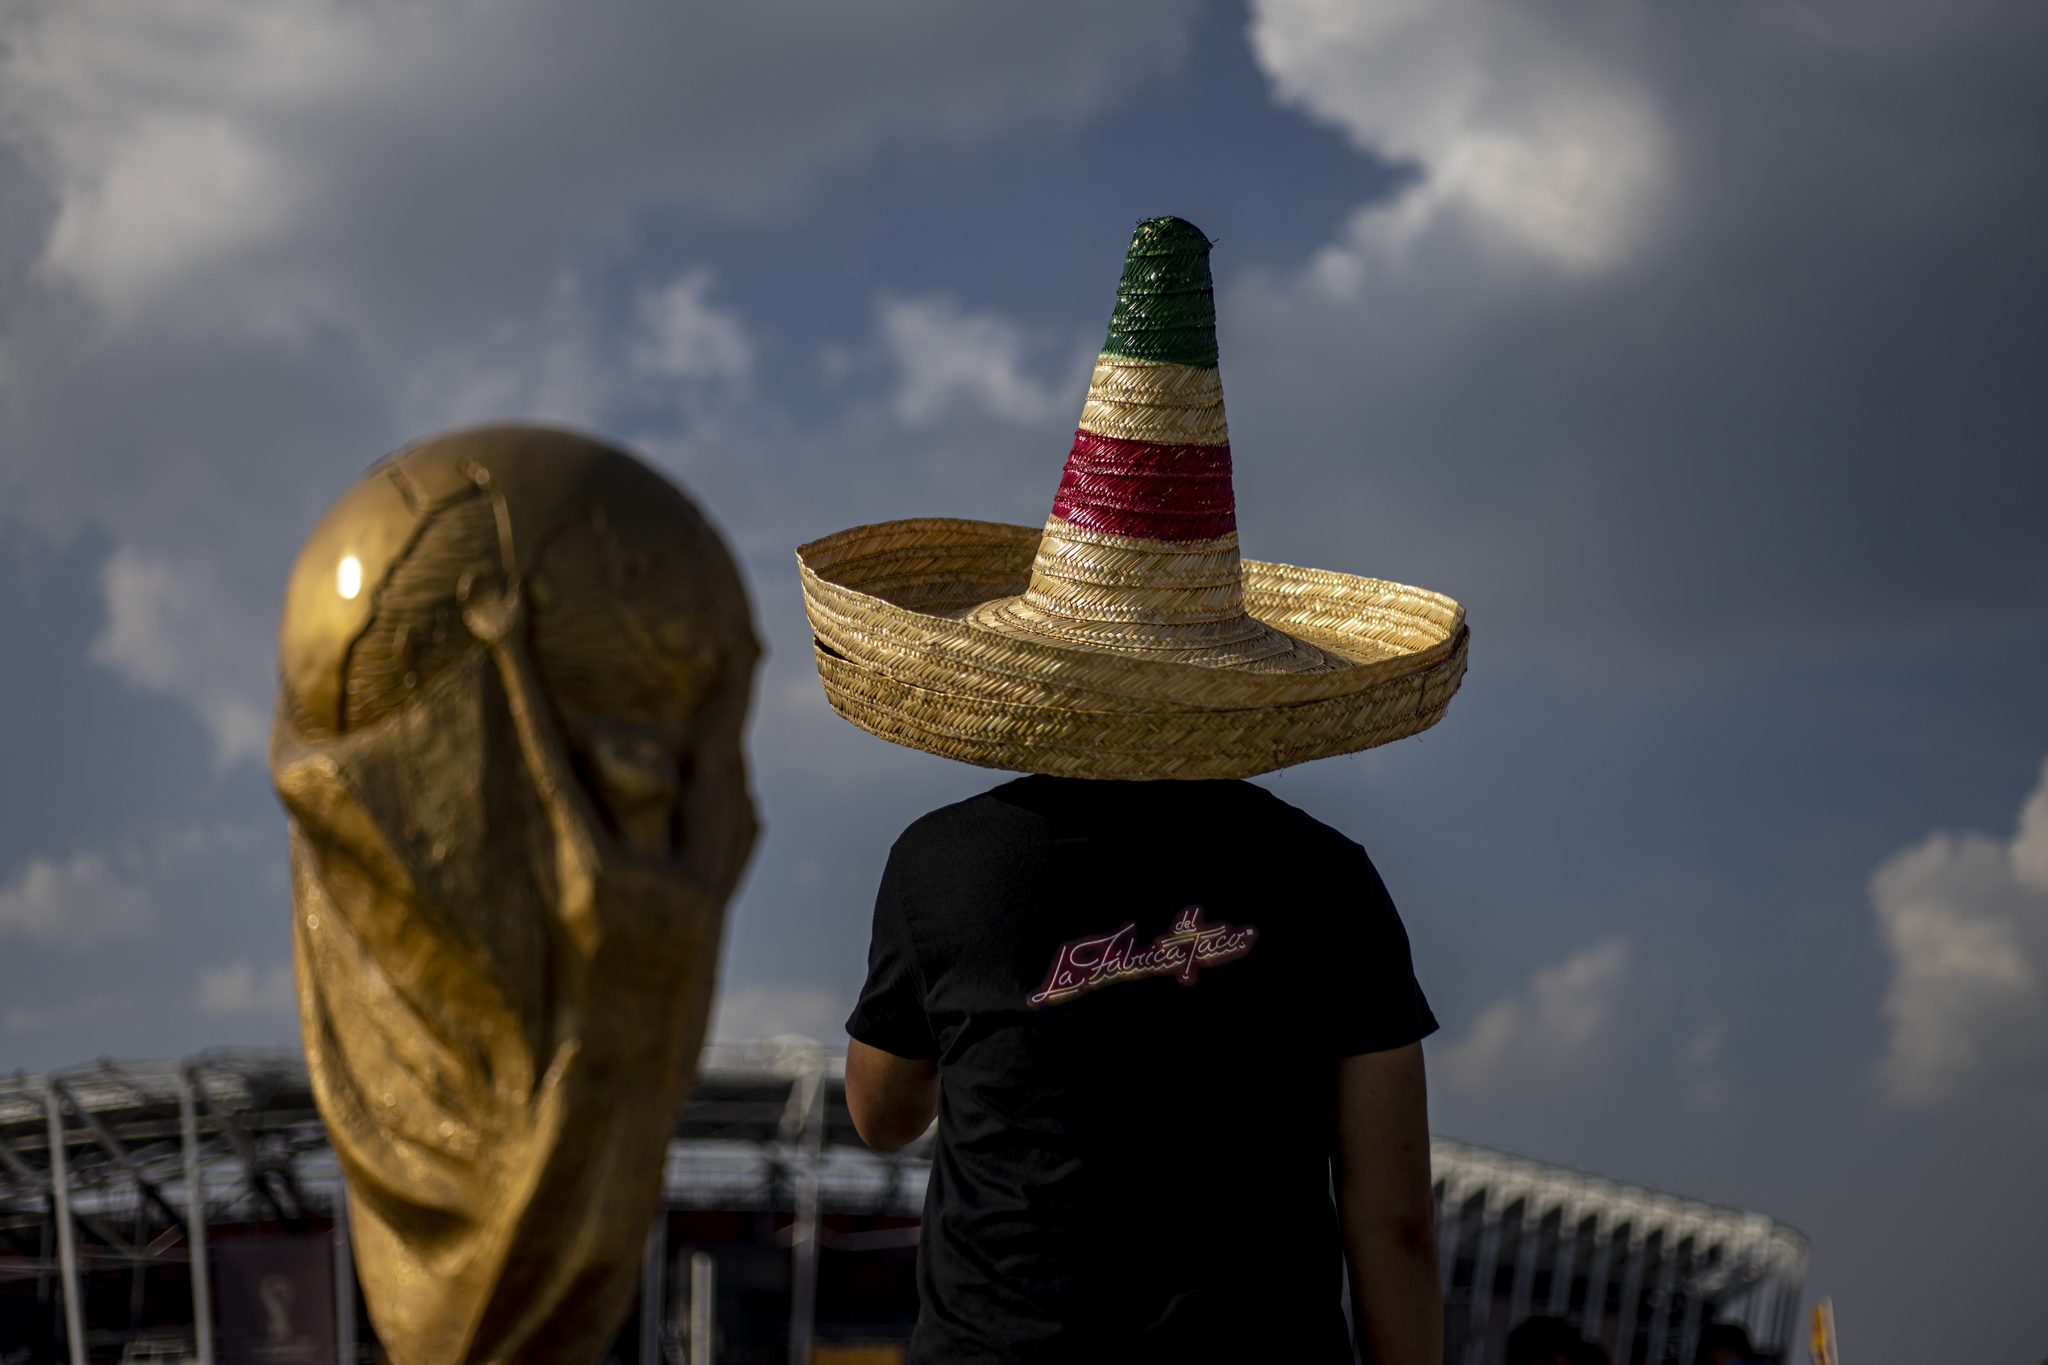 A fan and the World Cup trophy in Qatar